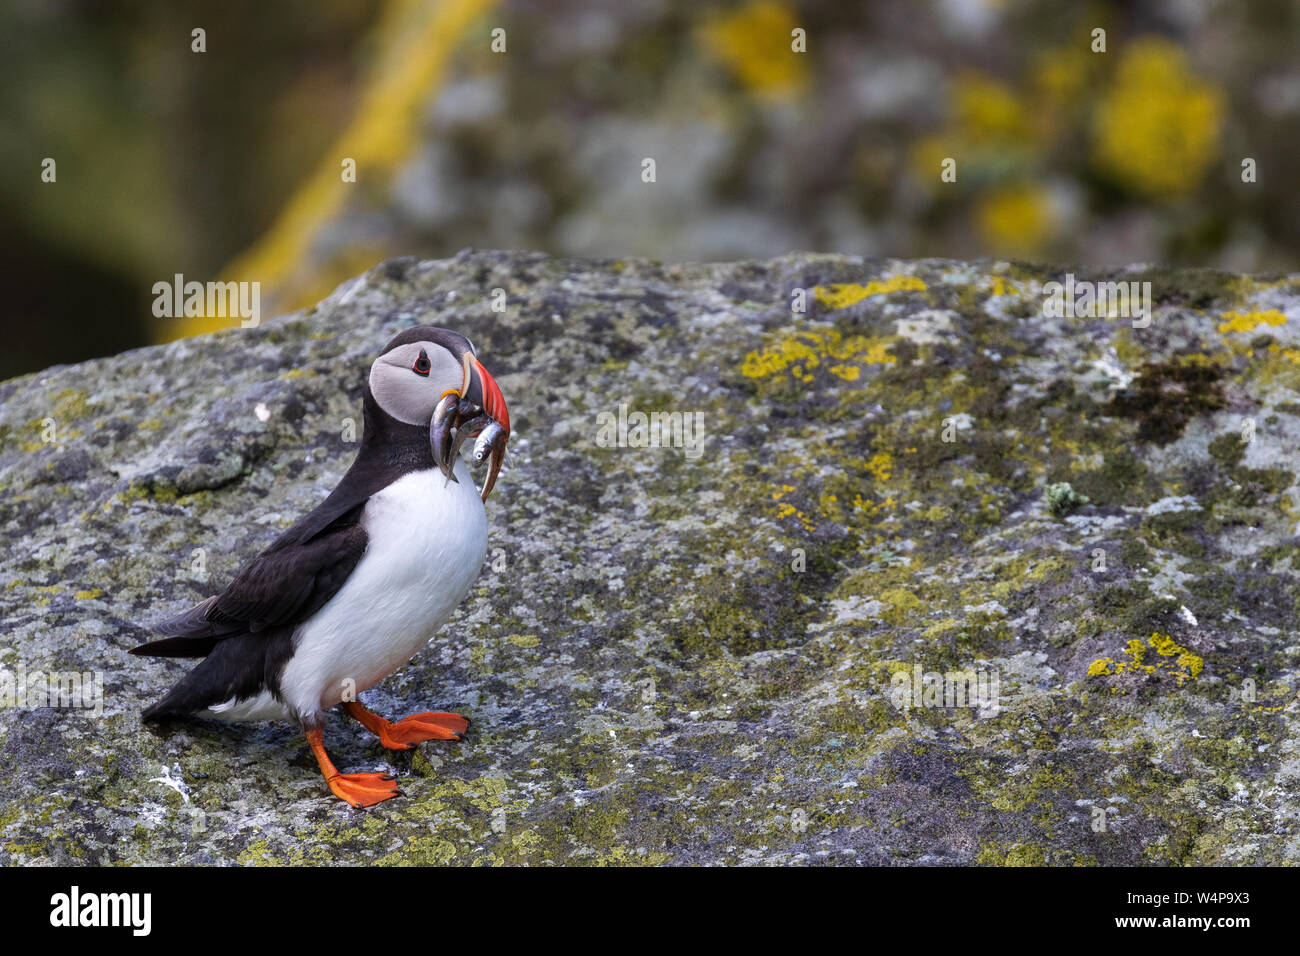 Adult Atlantic puffin with sand eels in its beak Stock Photo